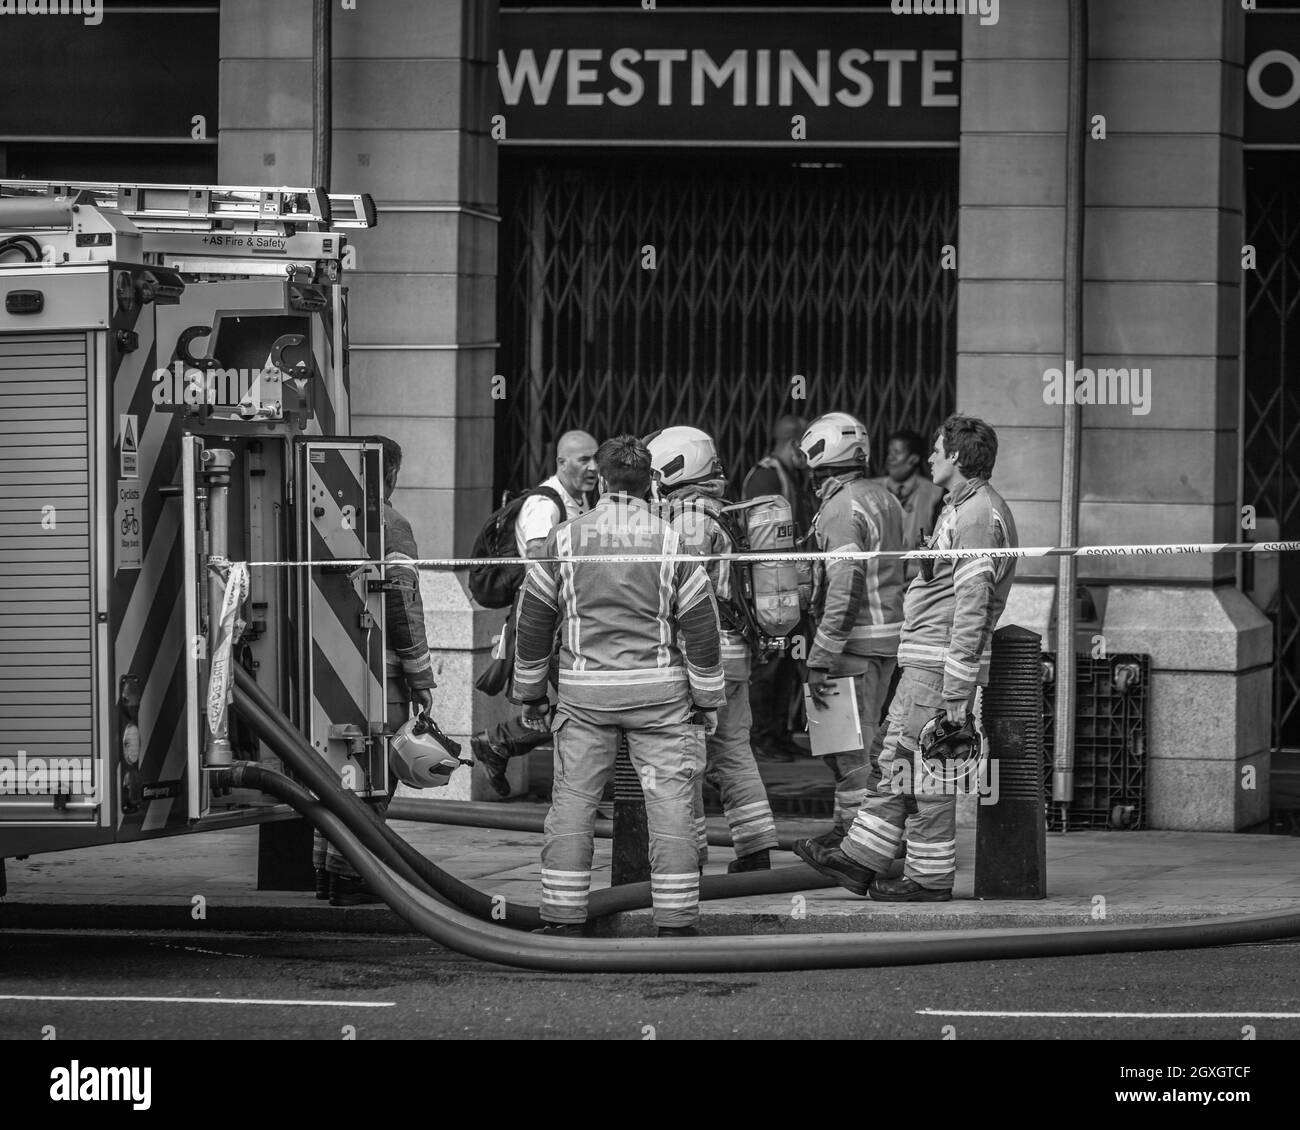 Fire Fighters discuss tactics on how to tackle the fire at Westminster Tube Station. Stock Photo